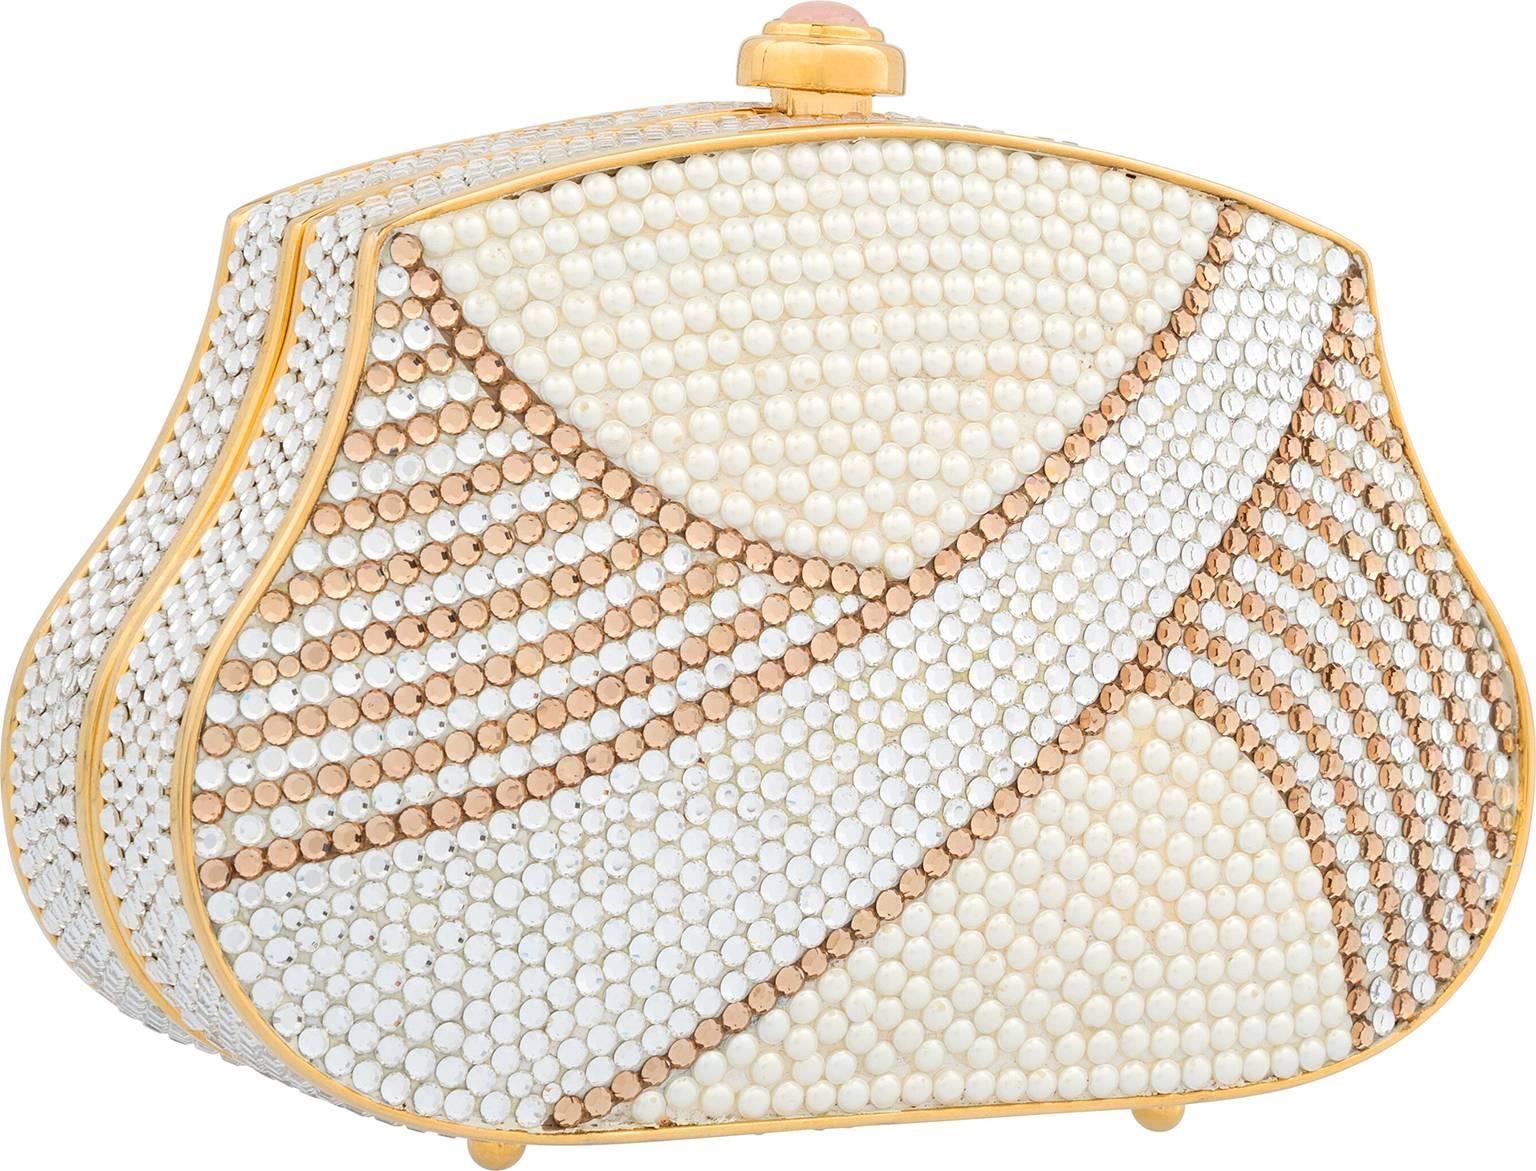 The perfect neutral eveningwear accent, this minaudiere is a great addition to a subtle glamorous look. Done in silver and gold crystals, featuring glass pearl accents, this minaudiere is a great way to add a quiet and quaint luxurious accessory to